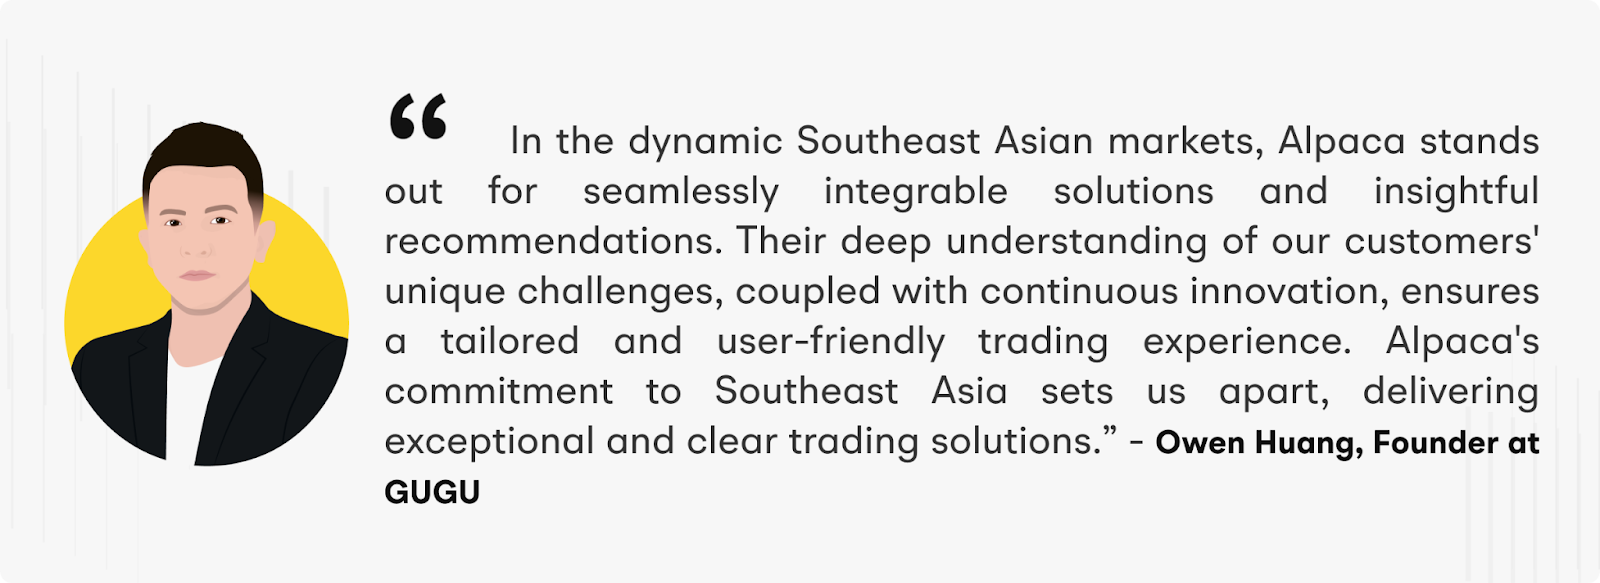 "In the dynamic Southeast Asian markets, Alpaca stands out for seamlessly integrable solutions and insightful recommendations. Their deep understanding of our customers' unique challenges, coupled with continuous innovation, ensures a tailored and user-friendly trading experience. Alpaca's commitment to Southeast Asia sets us apart, delivering exceptional and clear trading solutions.” – Owen Huang, Founder at GUGU